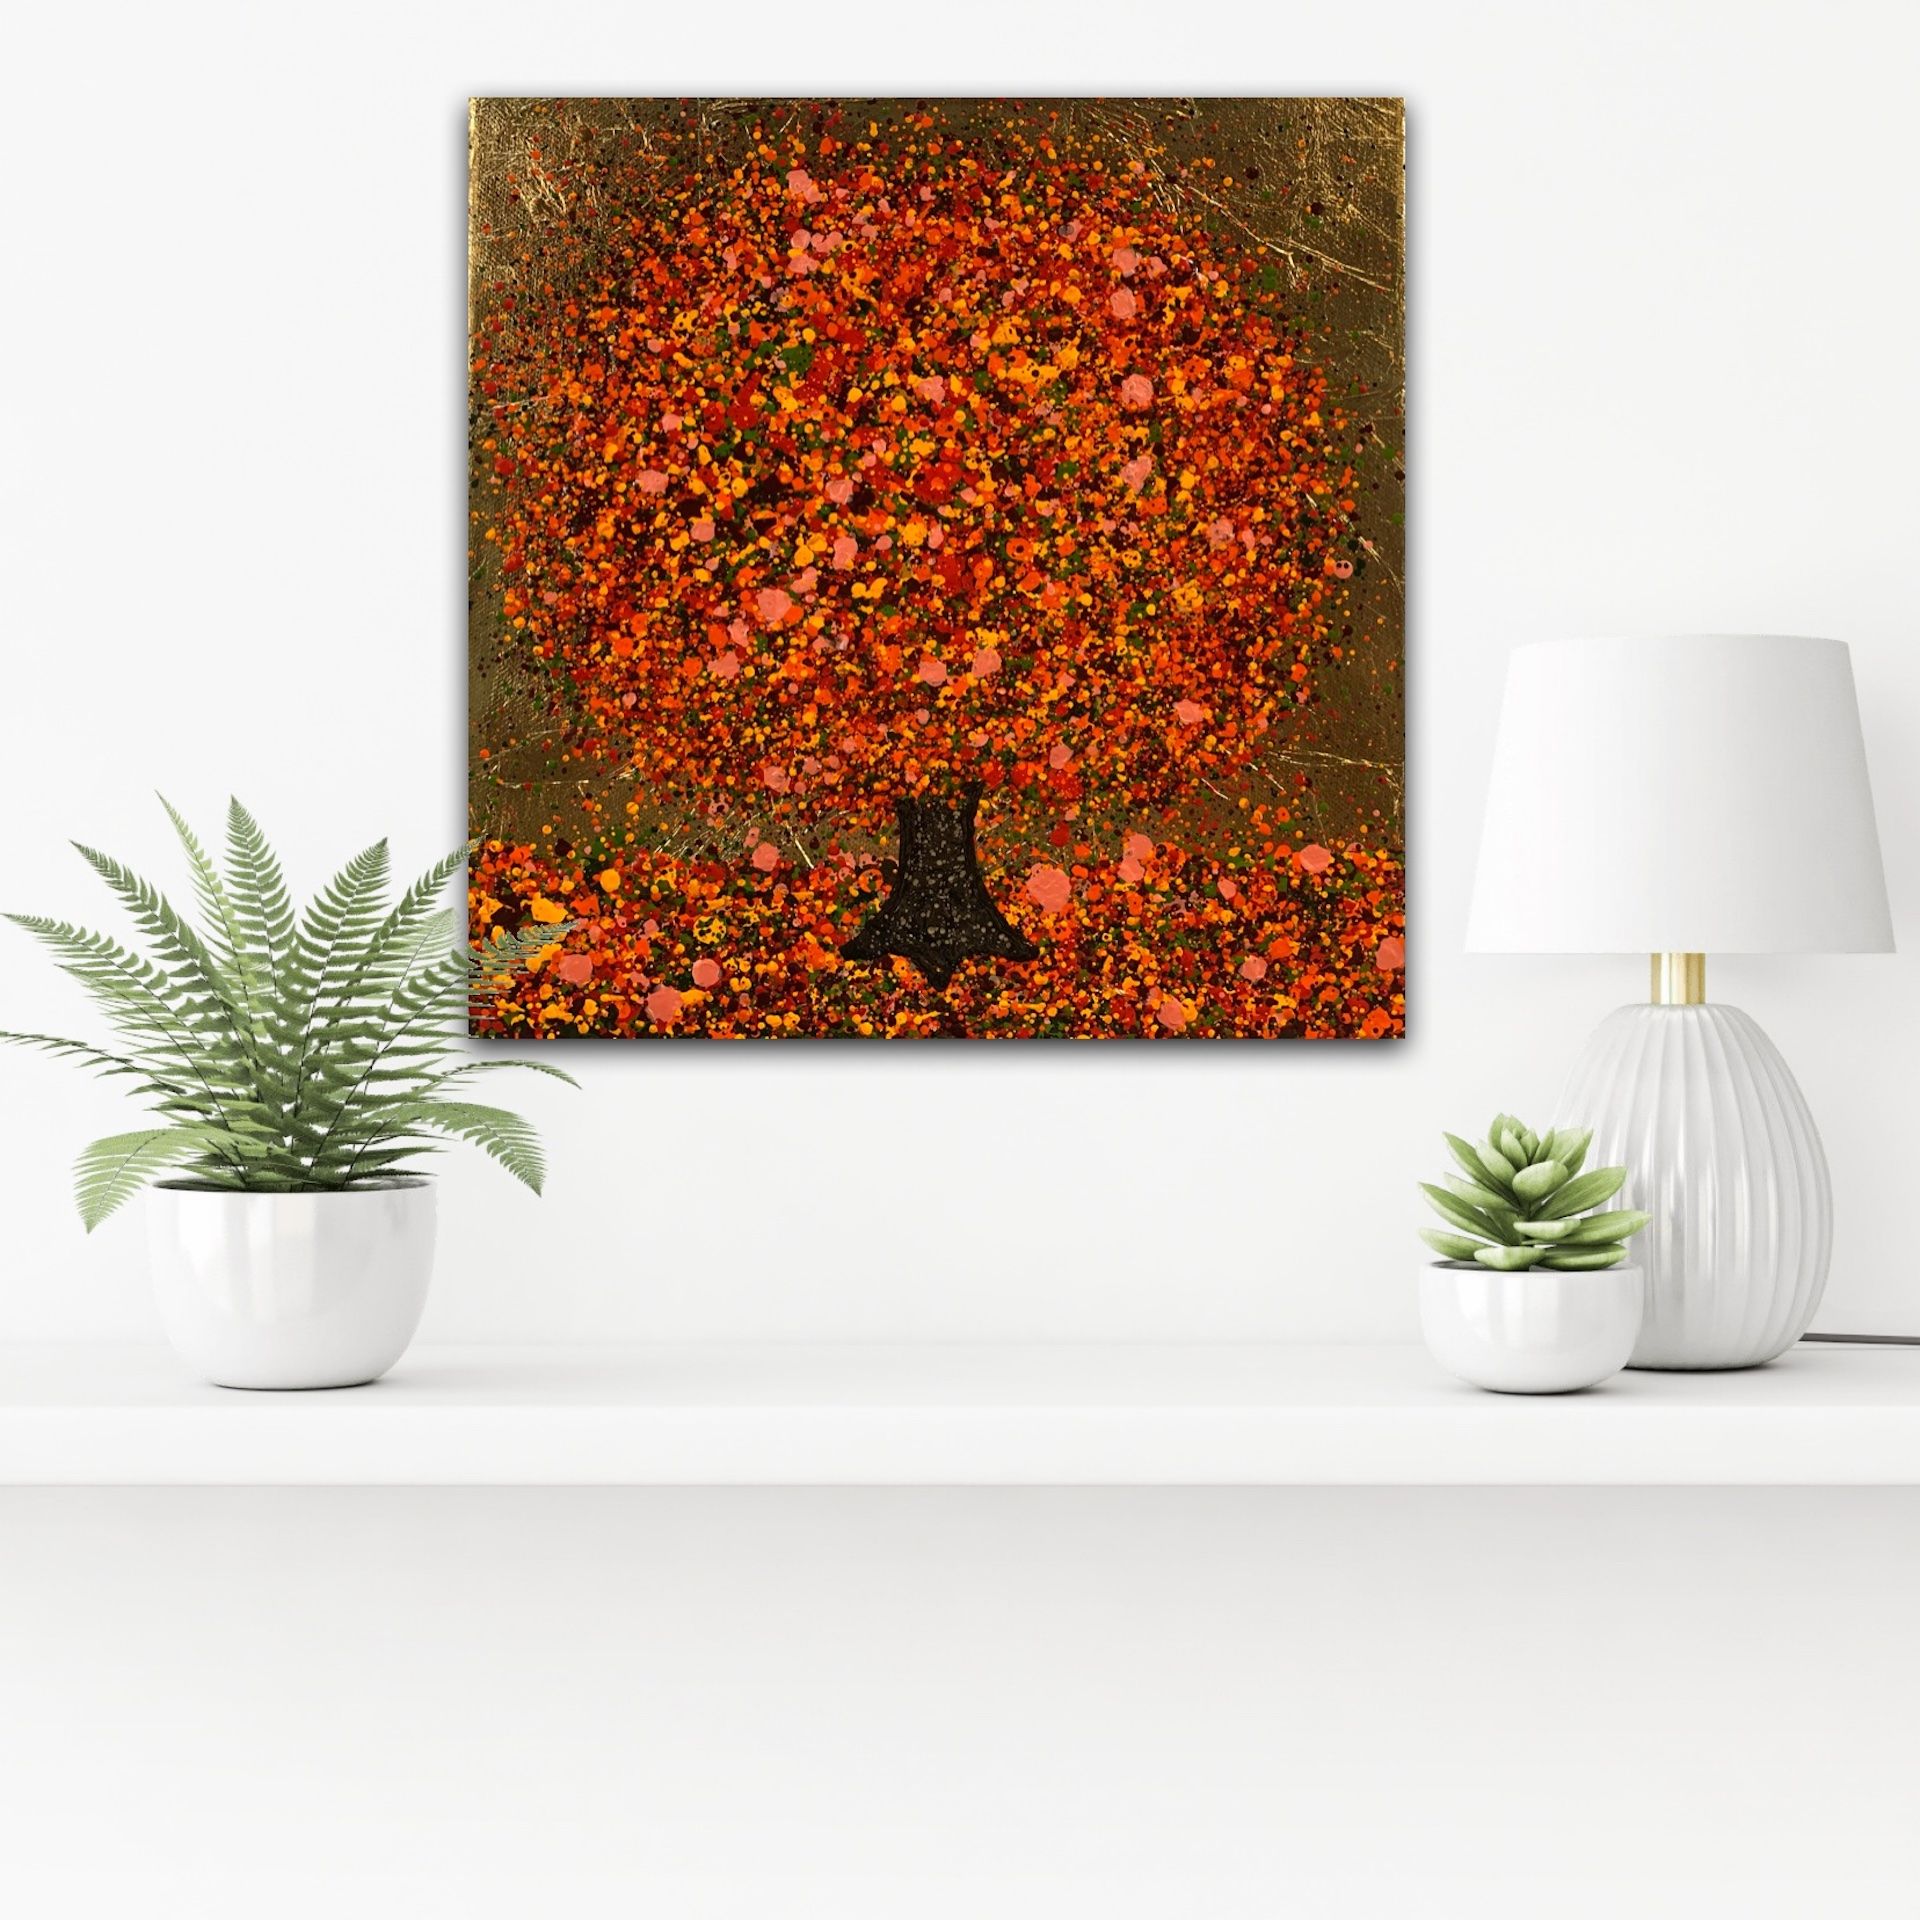 Shimmering Fall by Nicky Chubb - Secondary Image